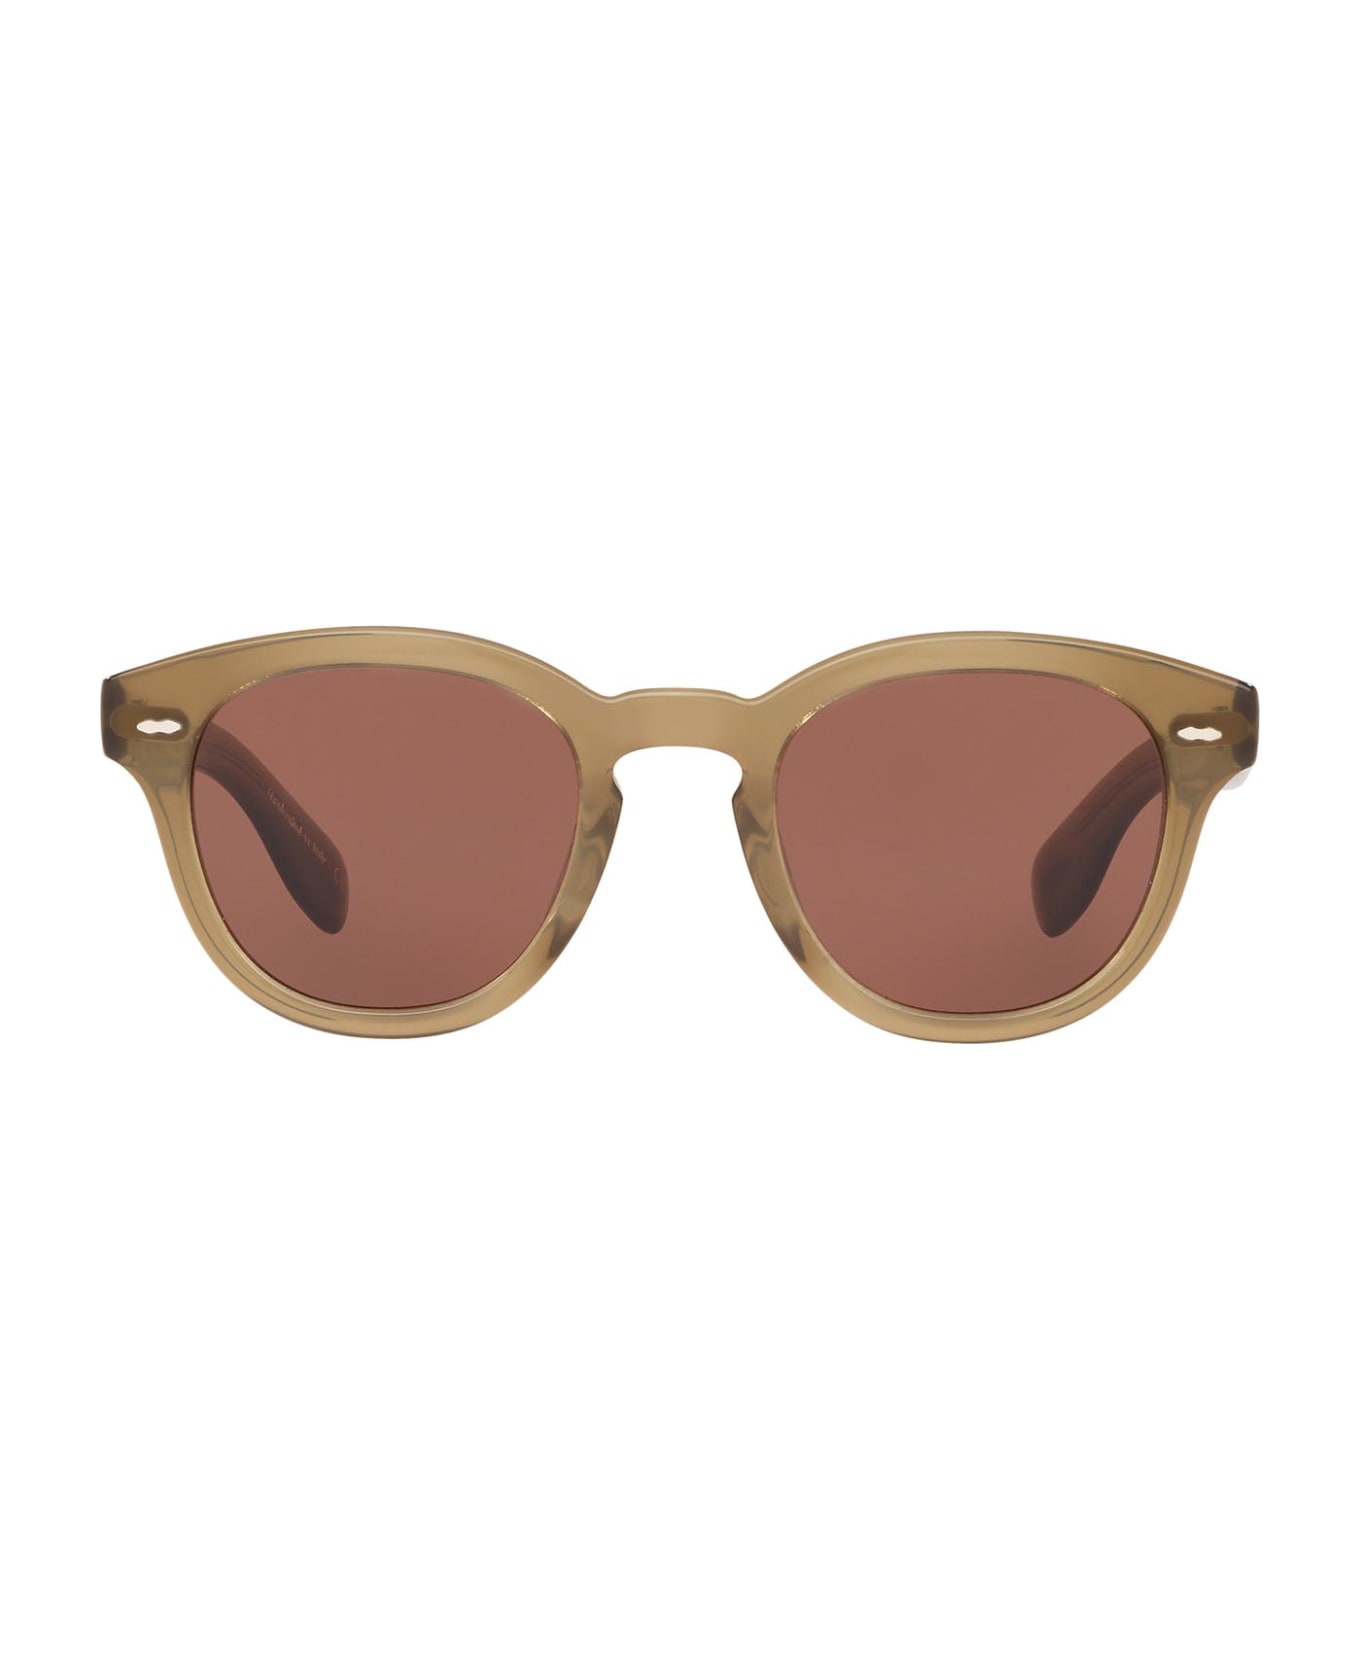 Oliver Peoples Ov5413su Dusty Olive Sunglasses - Dusty Olive